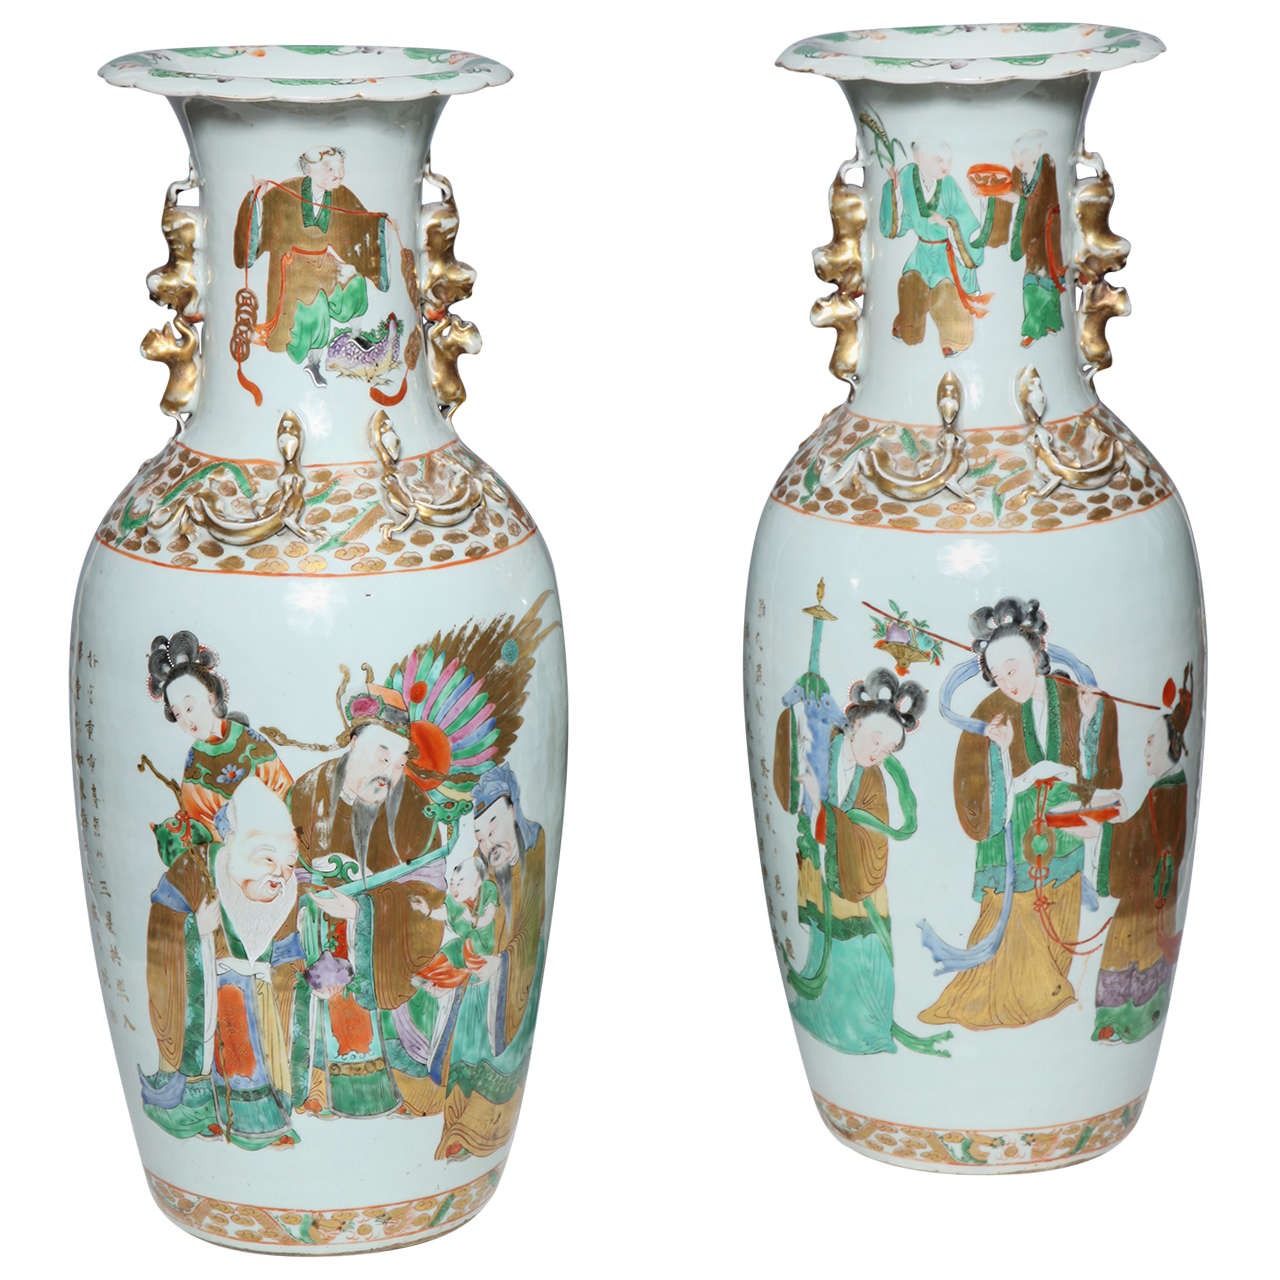 Pair of Chinese Porcelain Vases with Painted Figures and Chinese Poems in Gold For Sale